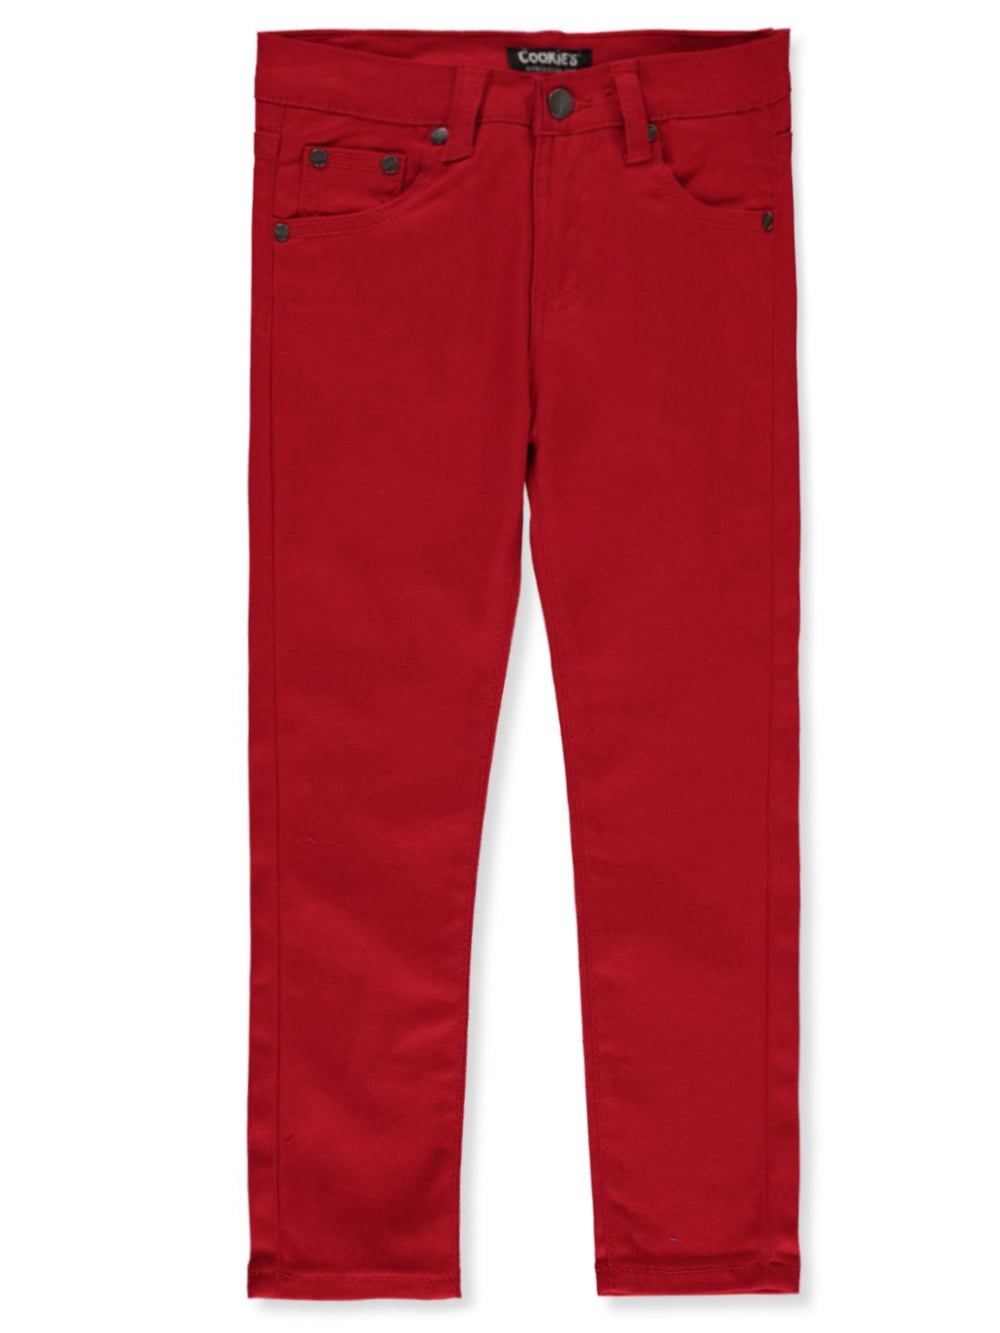 The Children's Place Boys' Basic Stretch Super Skinny Jeans